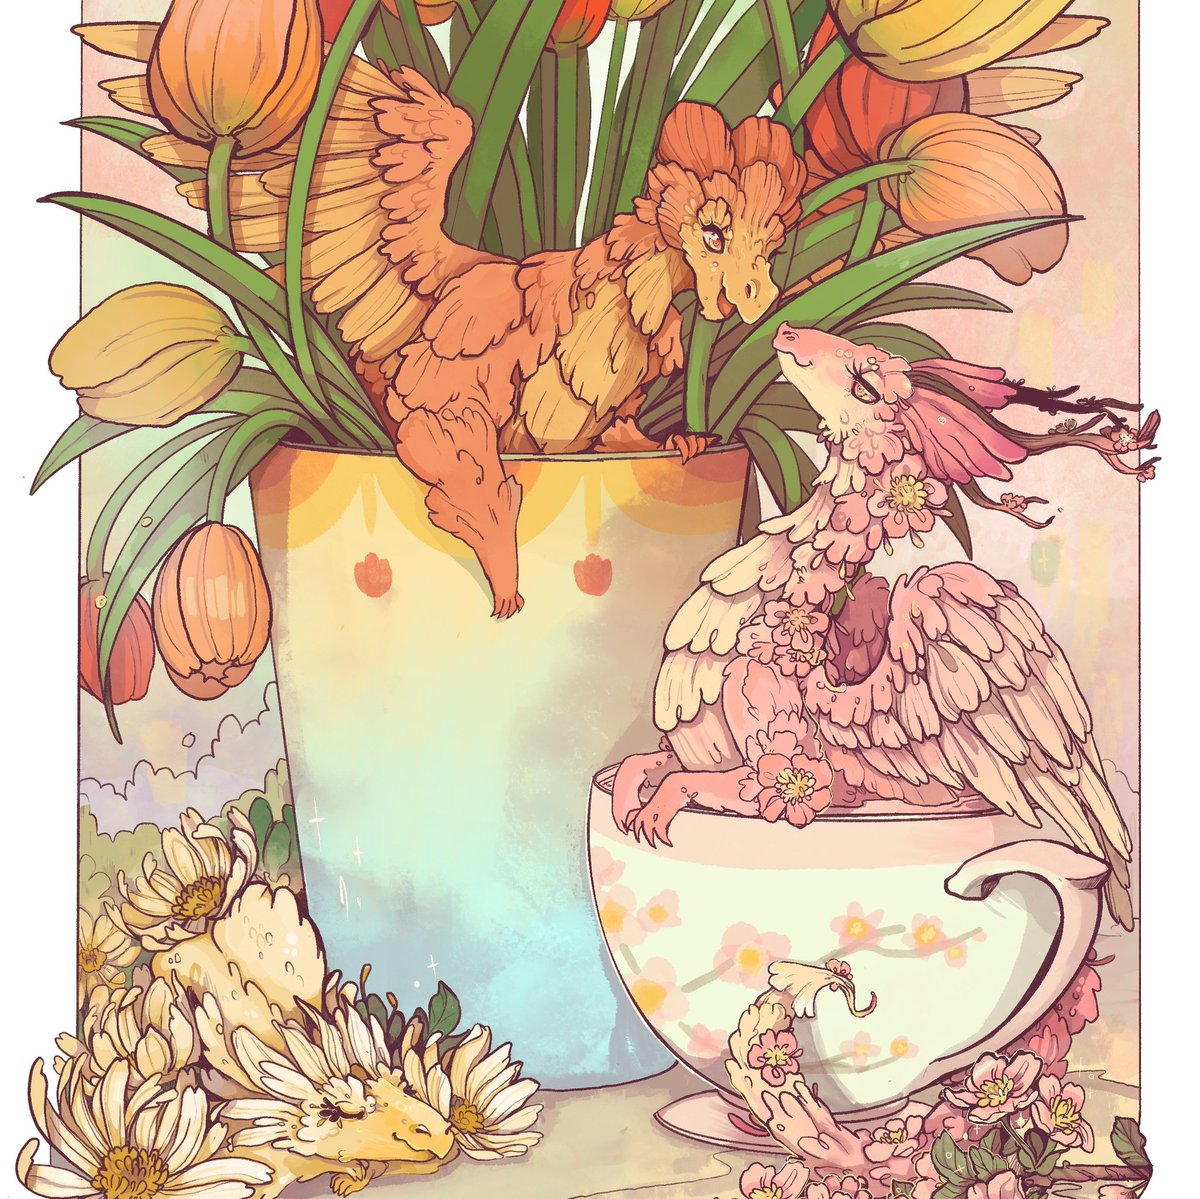 The teacup flower dragons love nothing more than a fresh cuppa and the smell of spring. It's been a bit of a slow progress this week as my chronic fatigue after the last few busy weeks of events has been overwhelming, but I'm excited to dive into the store update and draw x